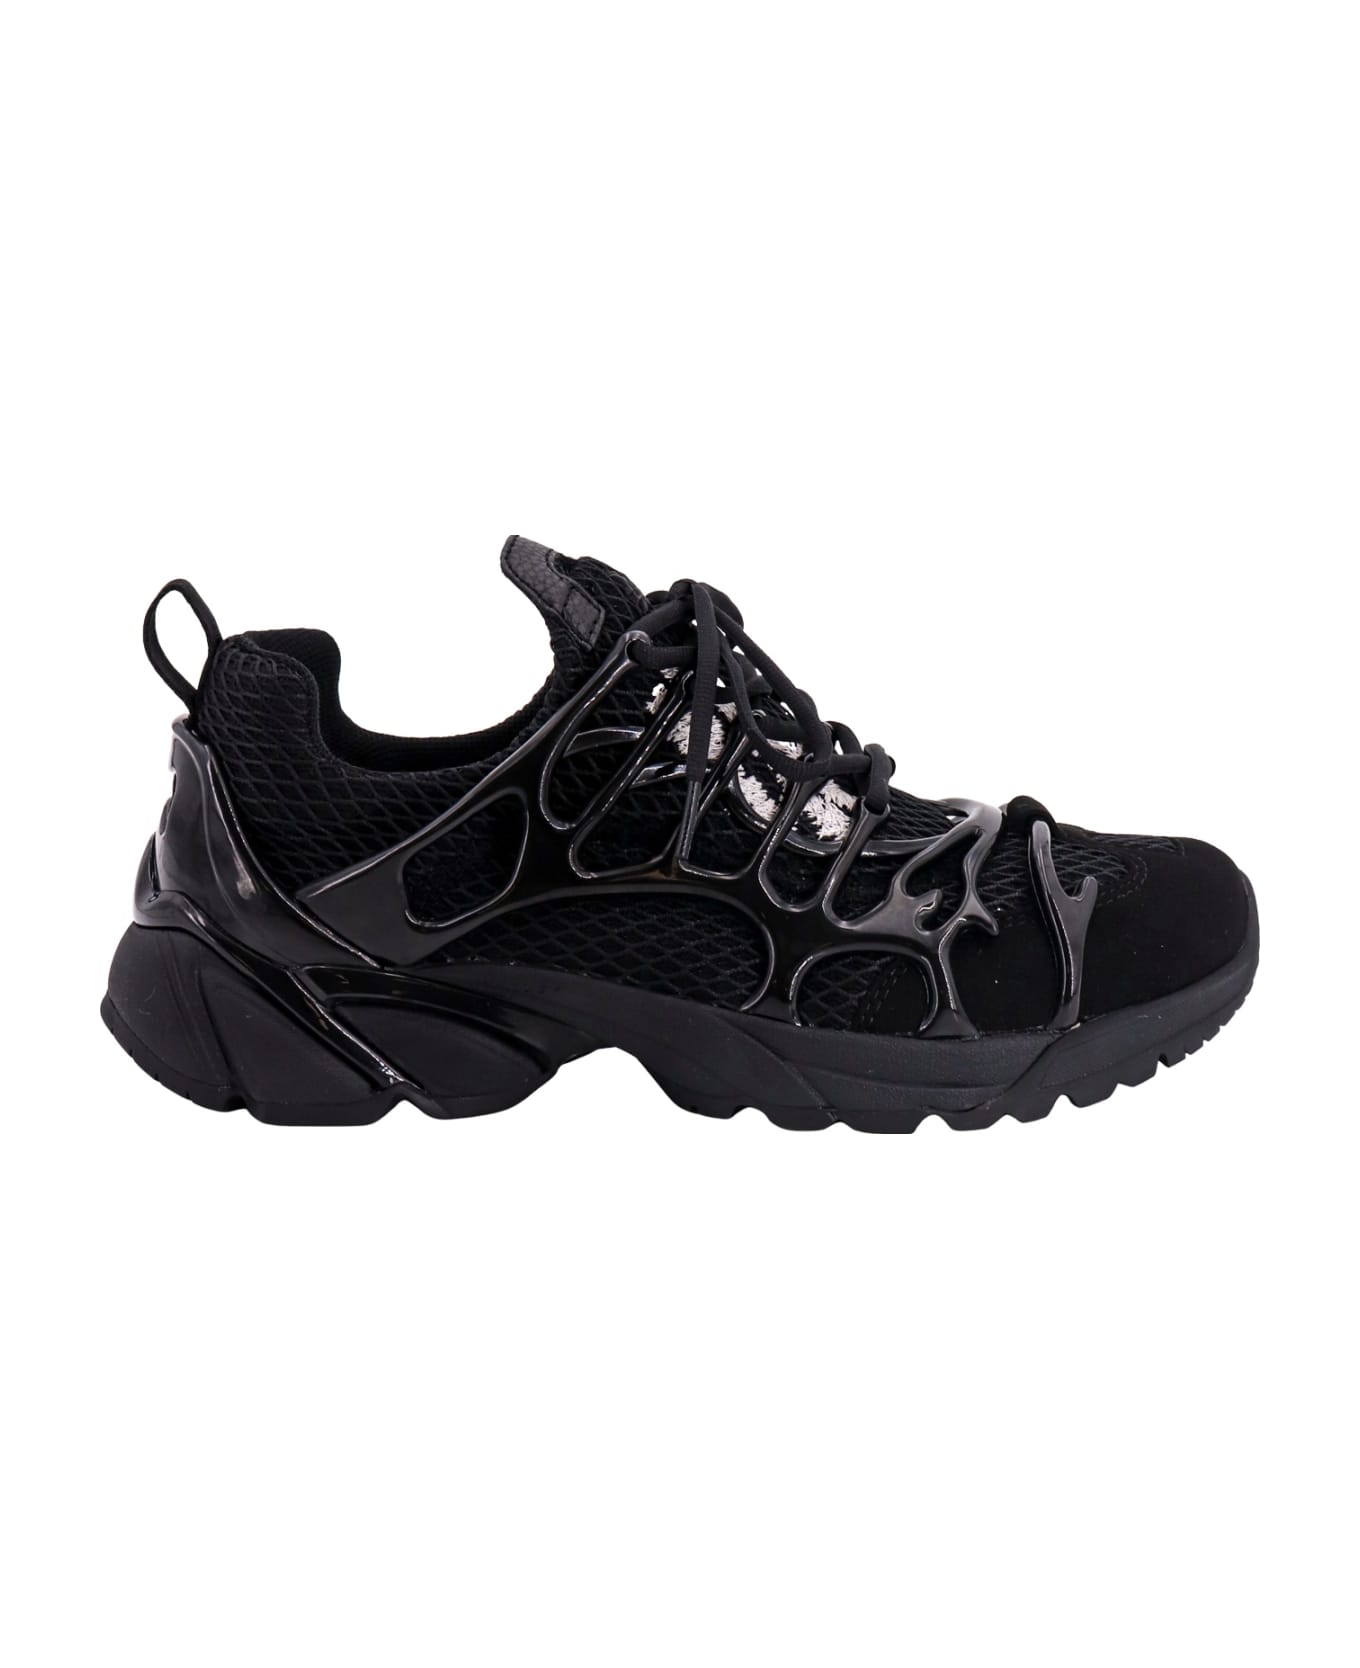 44 Label Group Symbiont Sneakers - Black